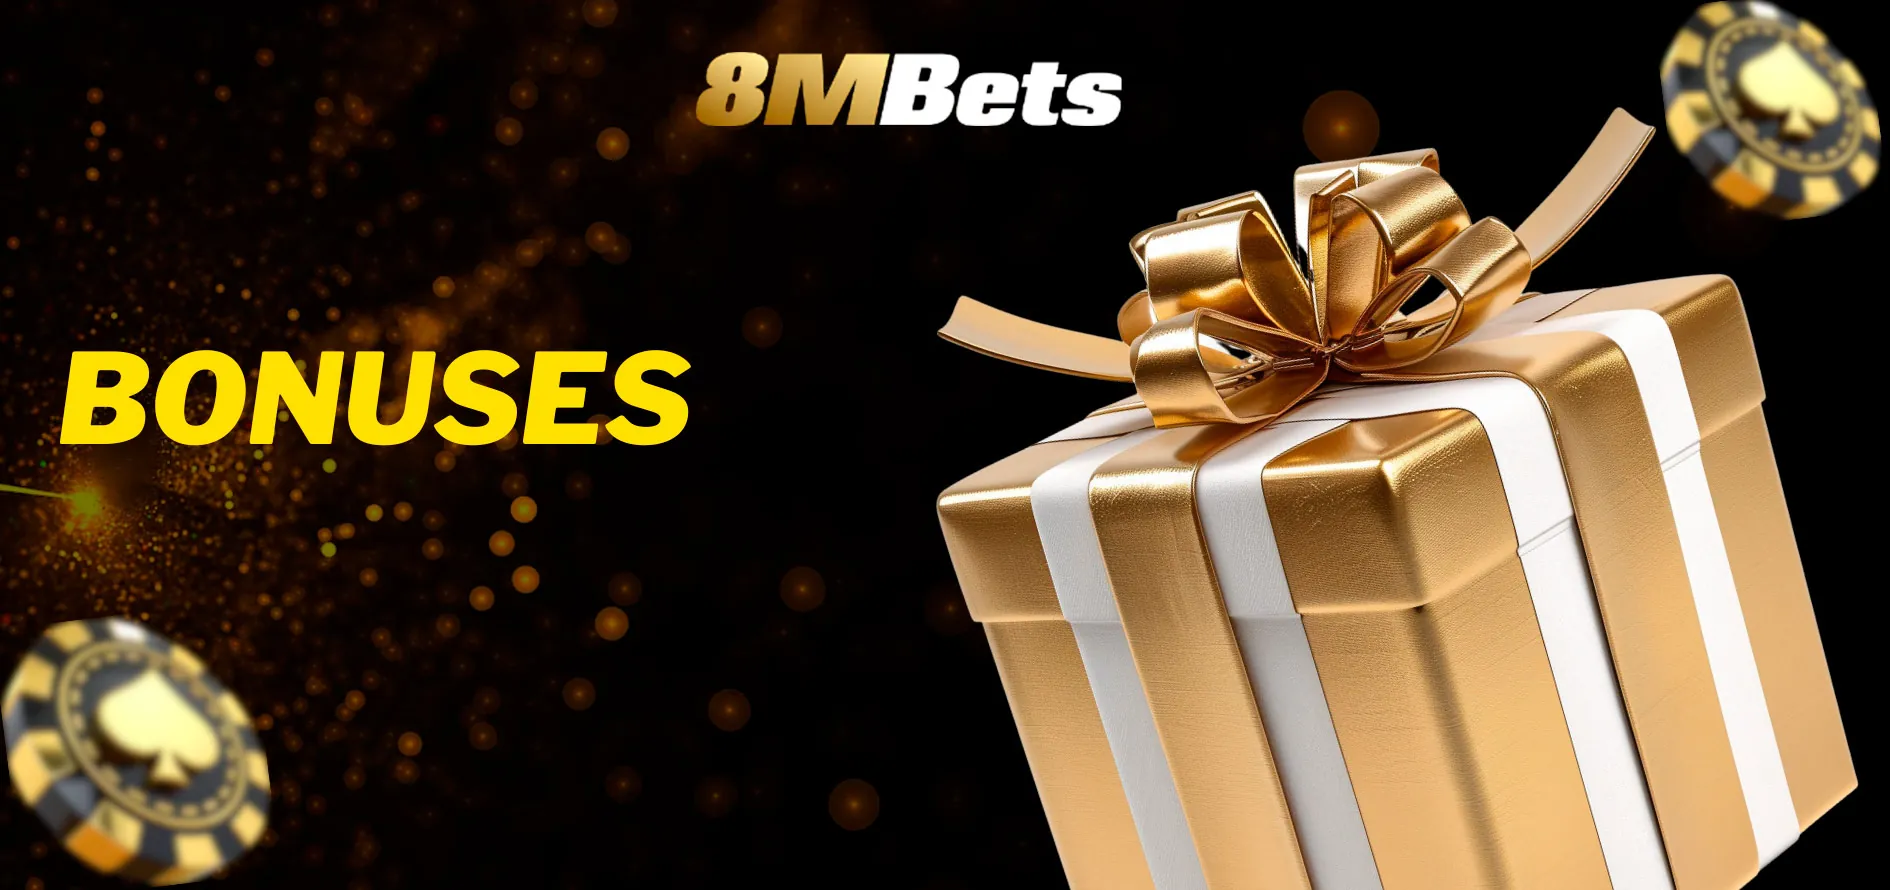 Discover the Latest 8mbets Bonuses and Promotions for Exciting Online Gambling